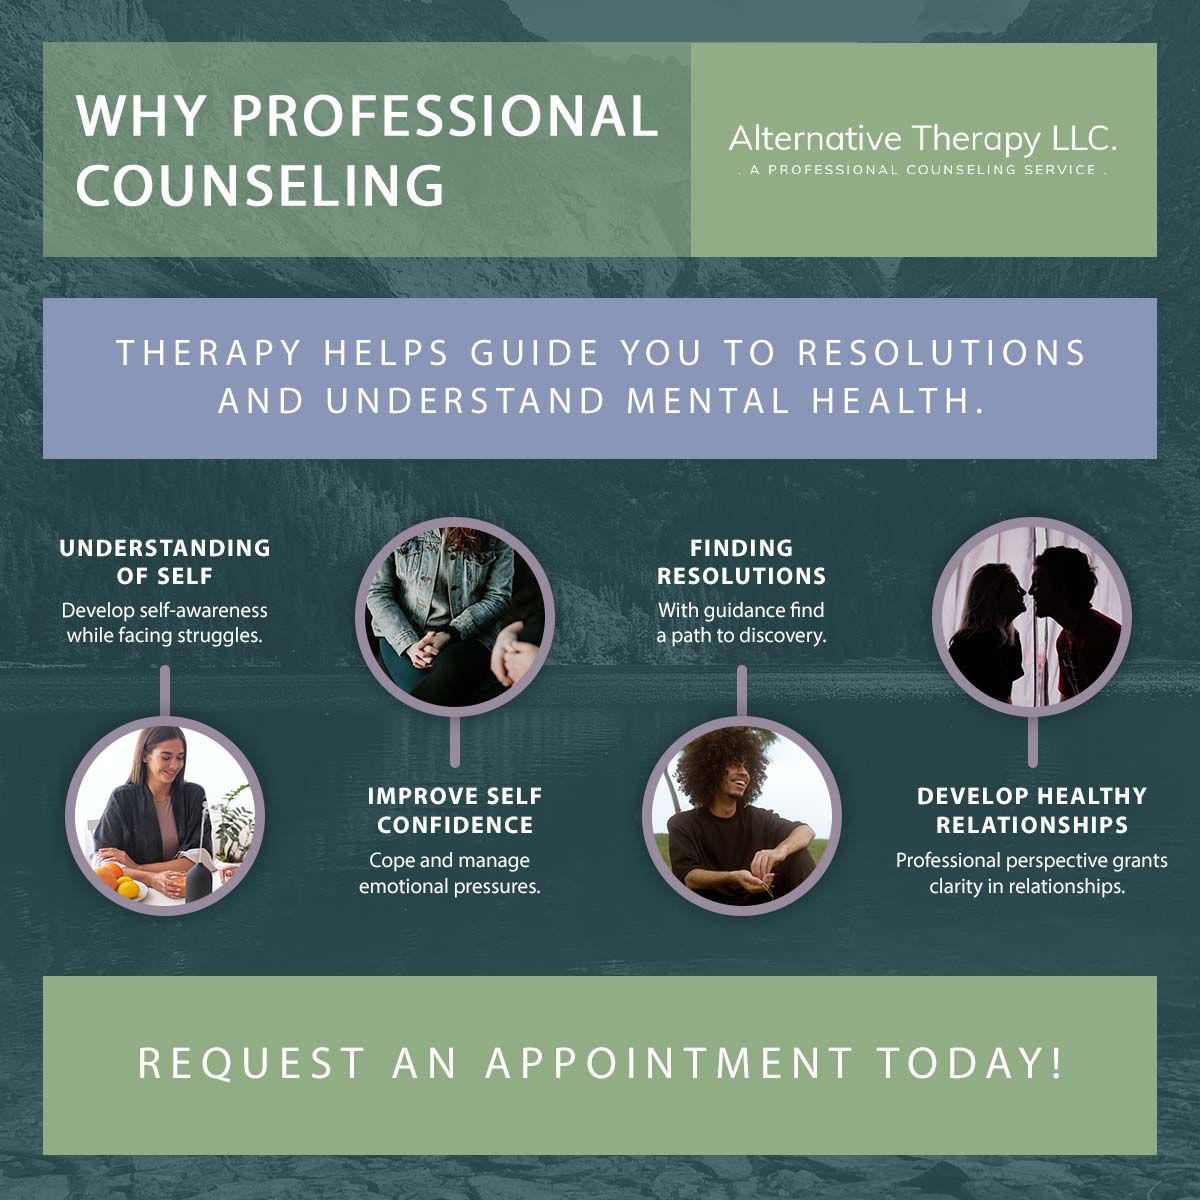 Why Professional Counseling is Essential.jpg